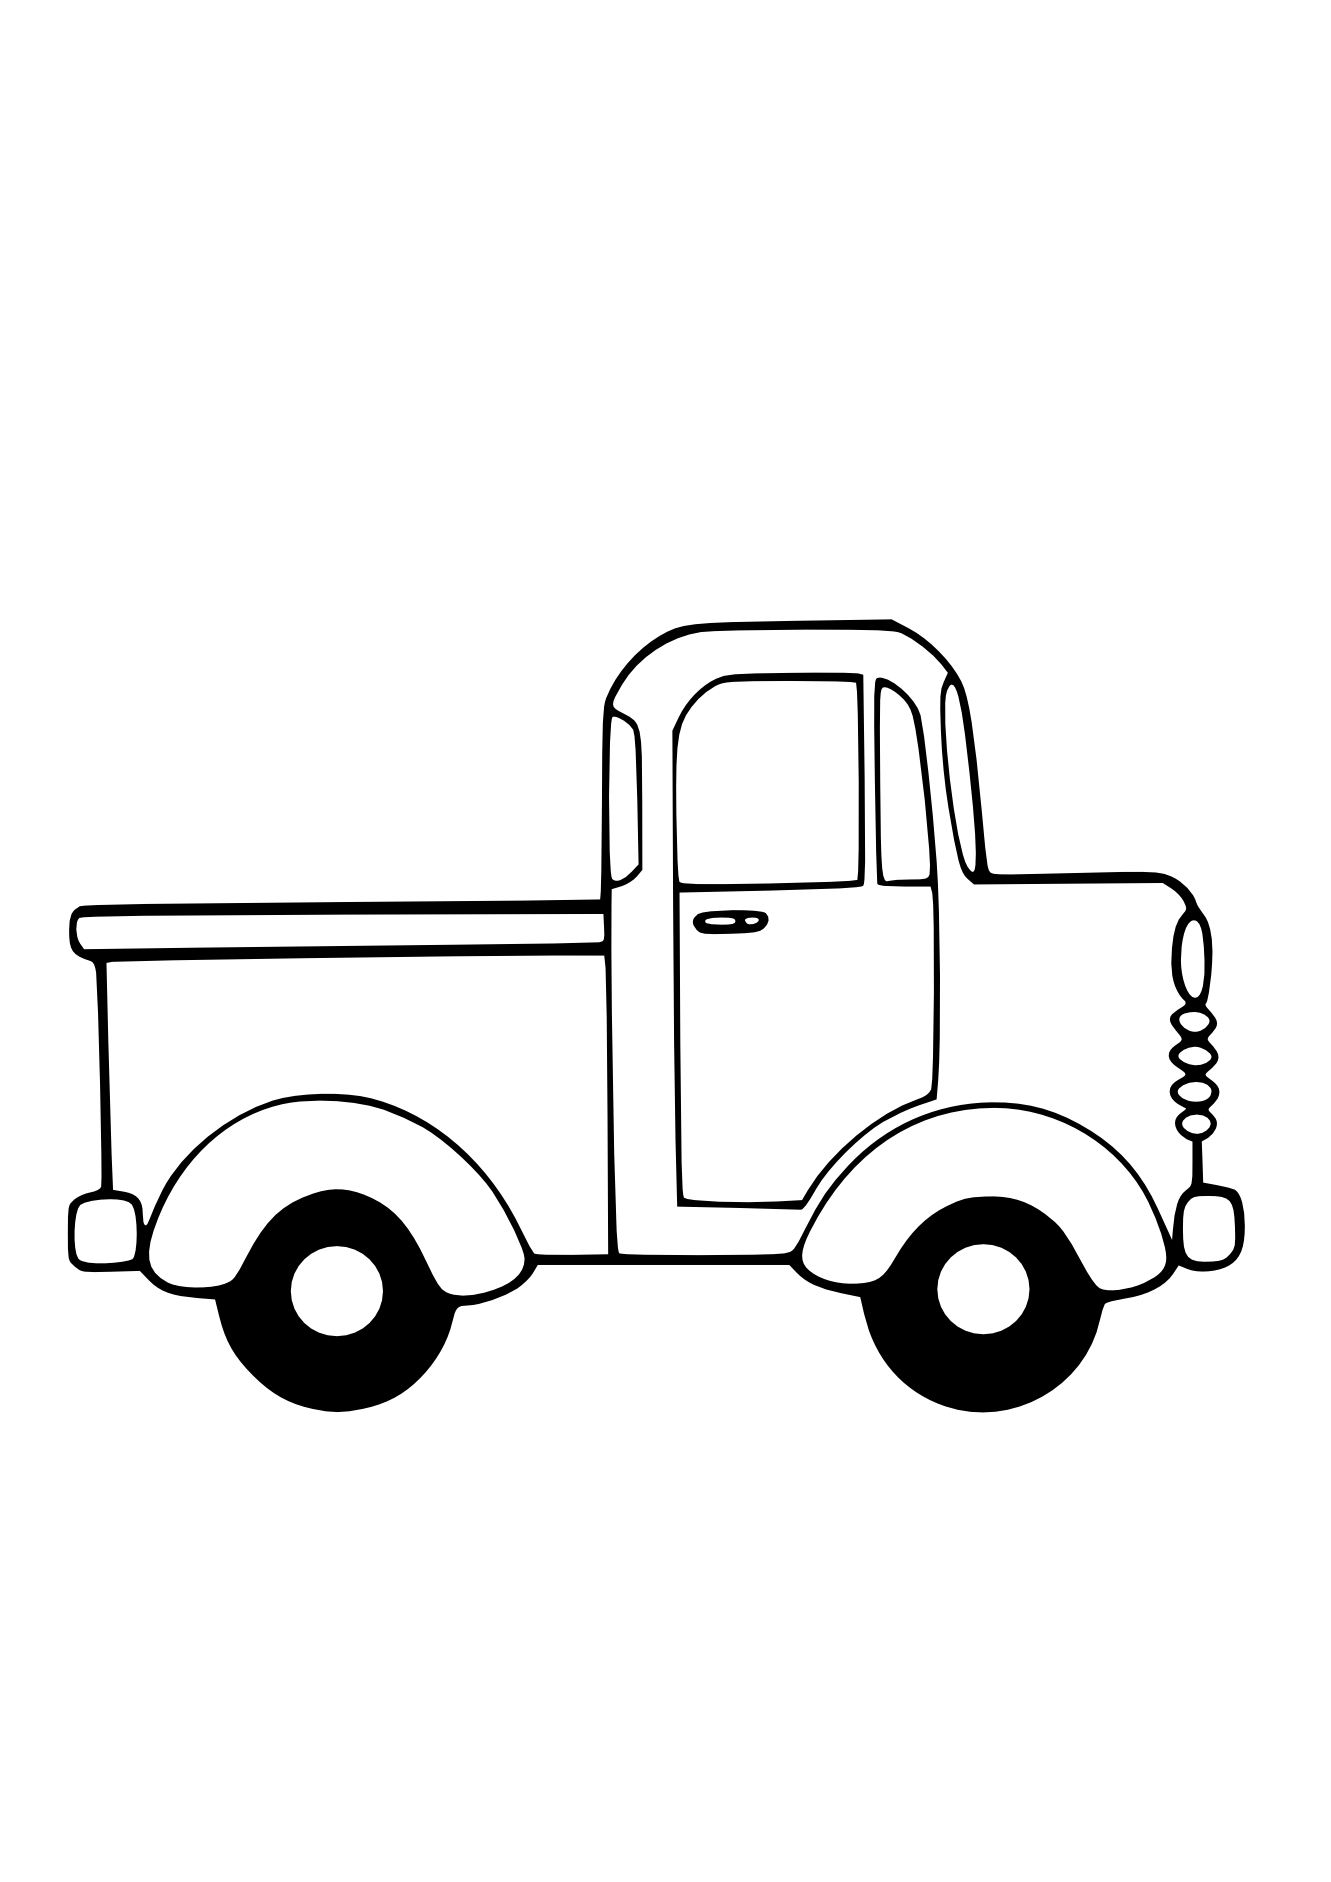 free black and white truck clipart - photo #7